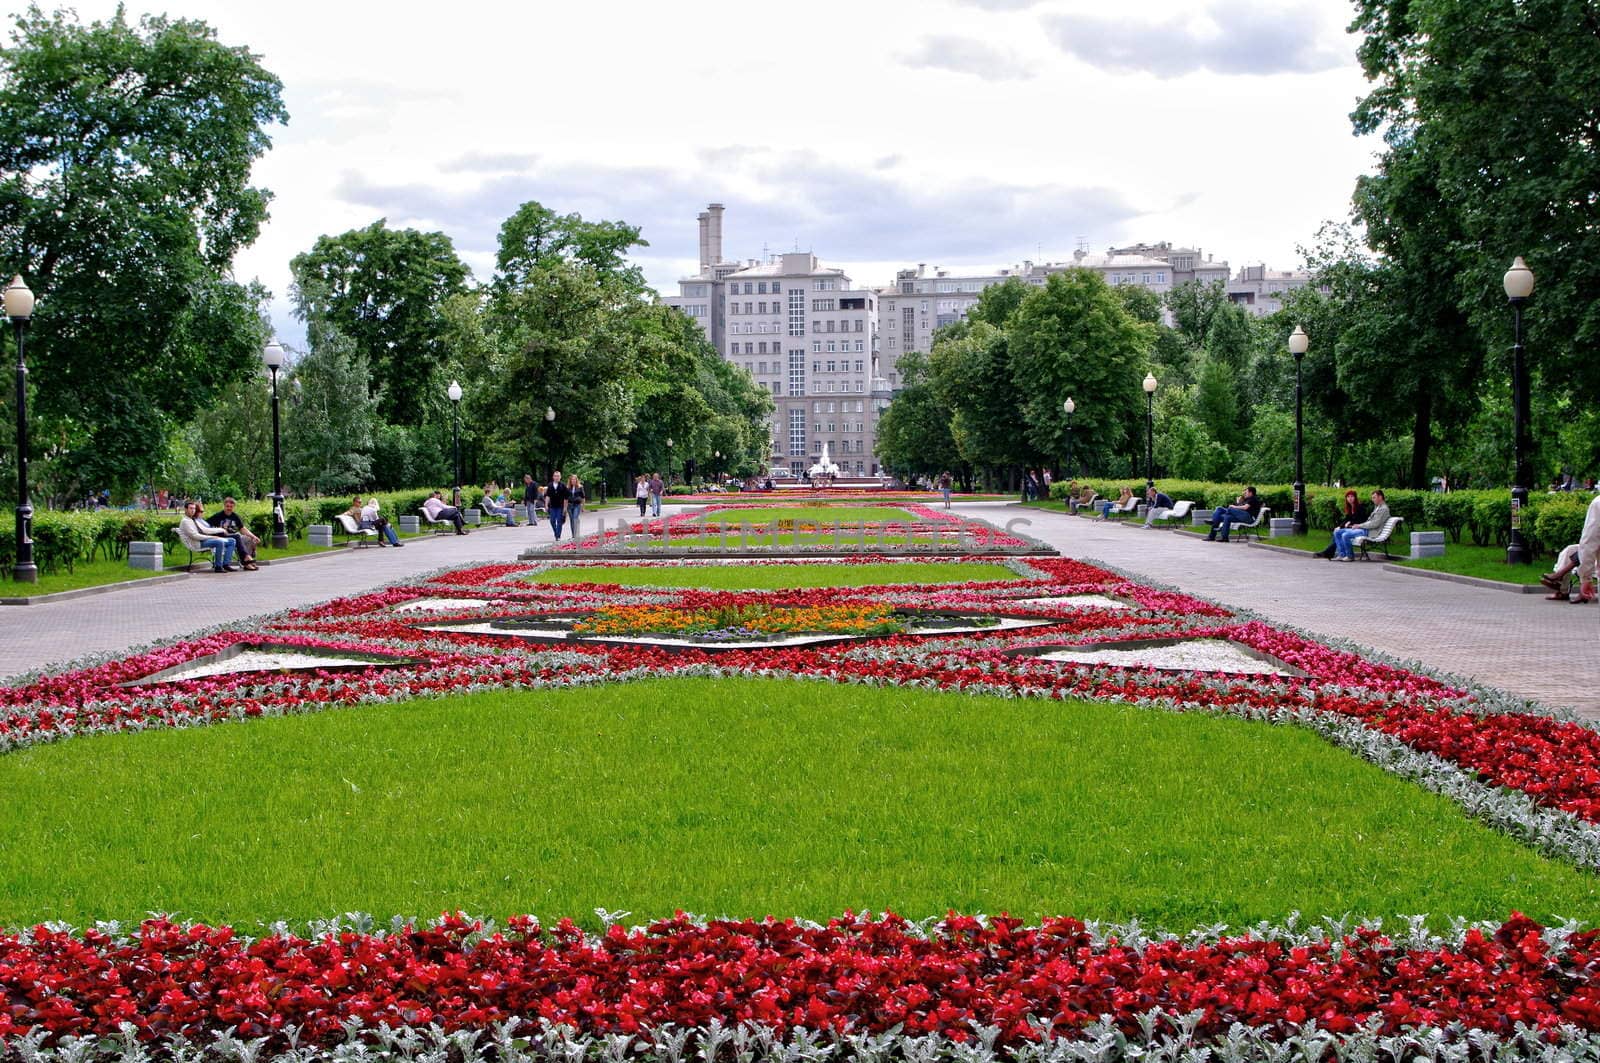 Flowerbed in Bolotnaya square, Moscow, Russia by Stoyanov